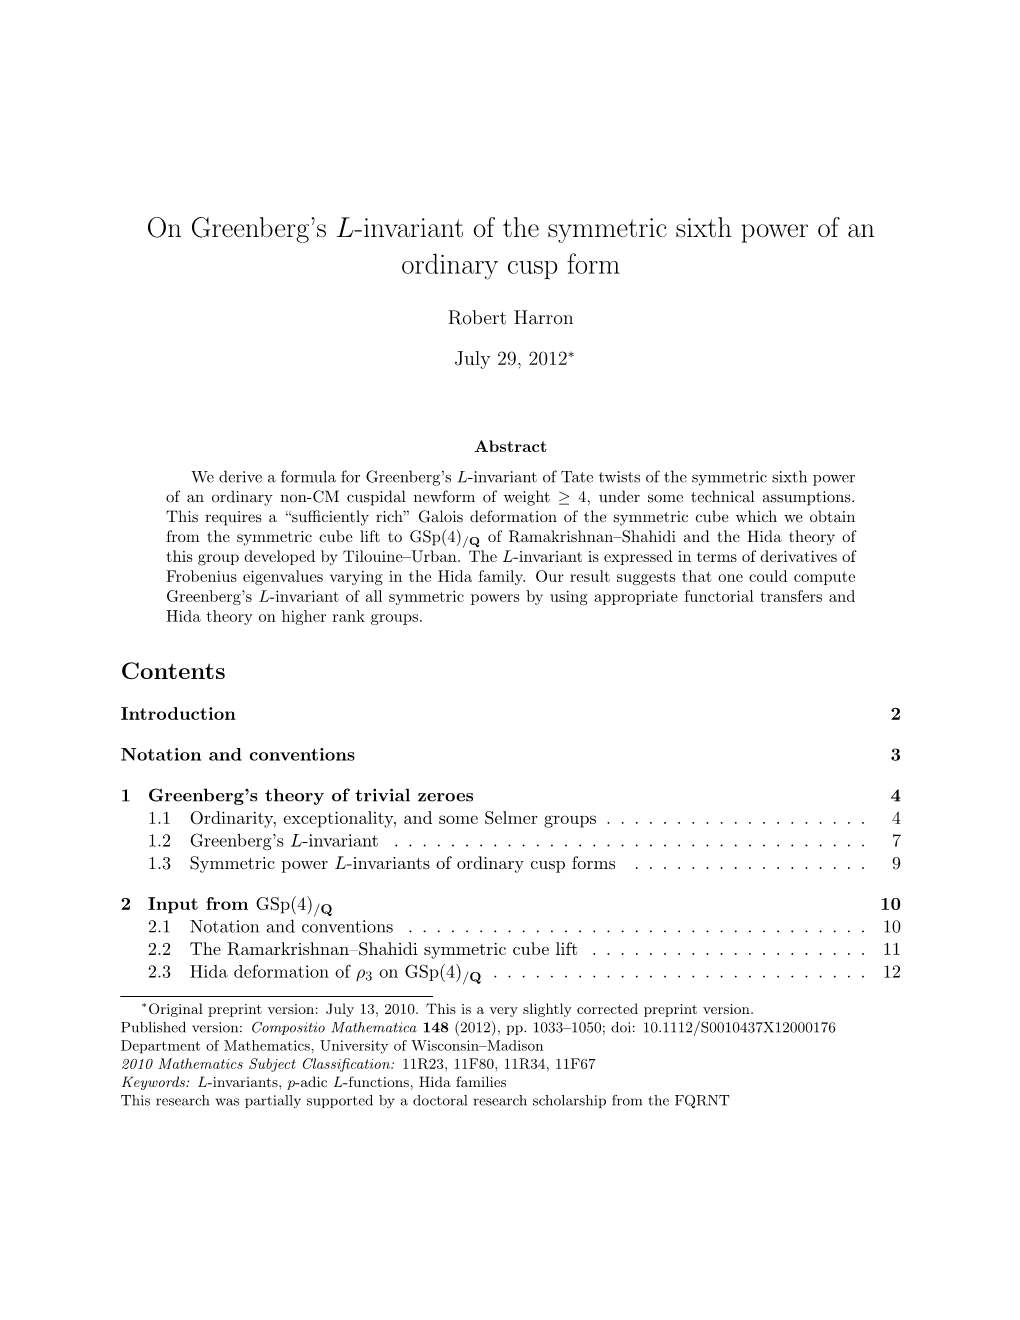 On Greenberg's L-Invariant of the Symmetric Sixth Power of An